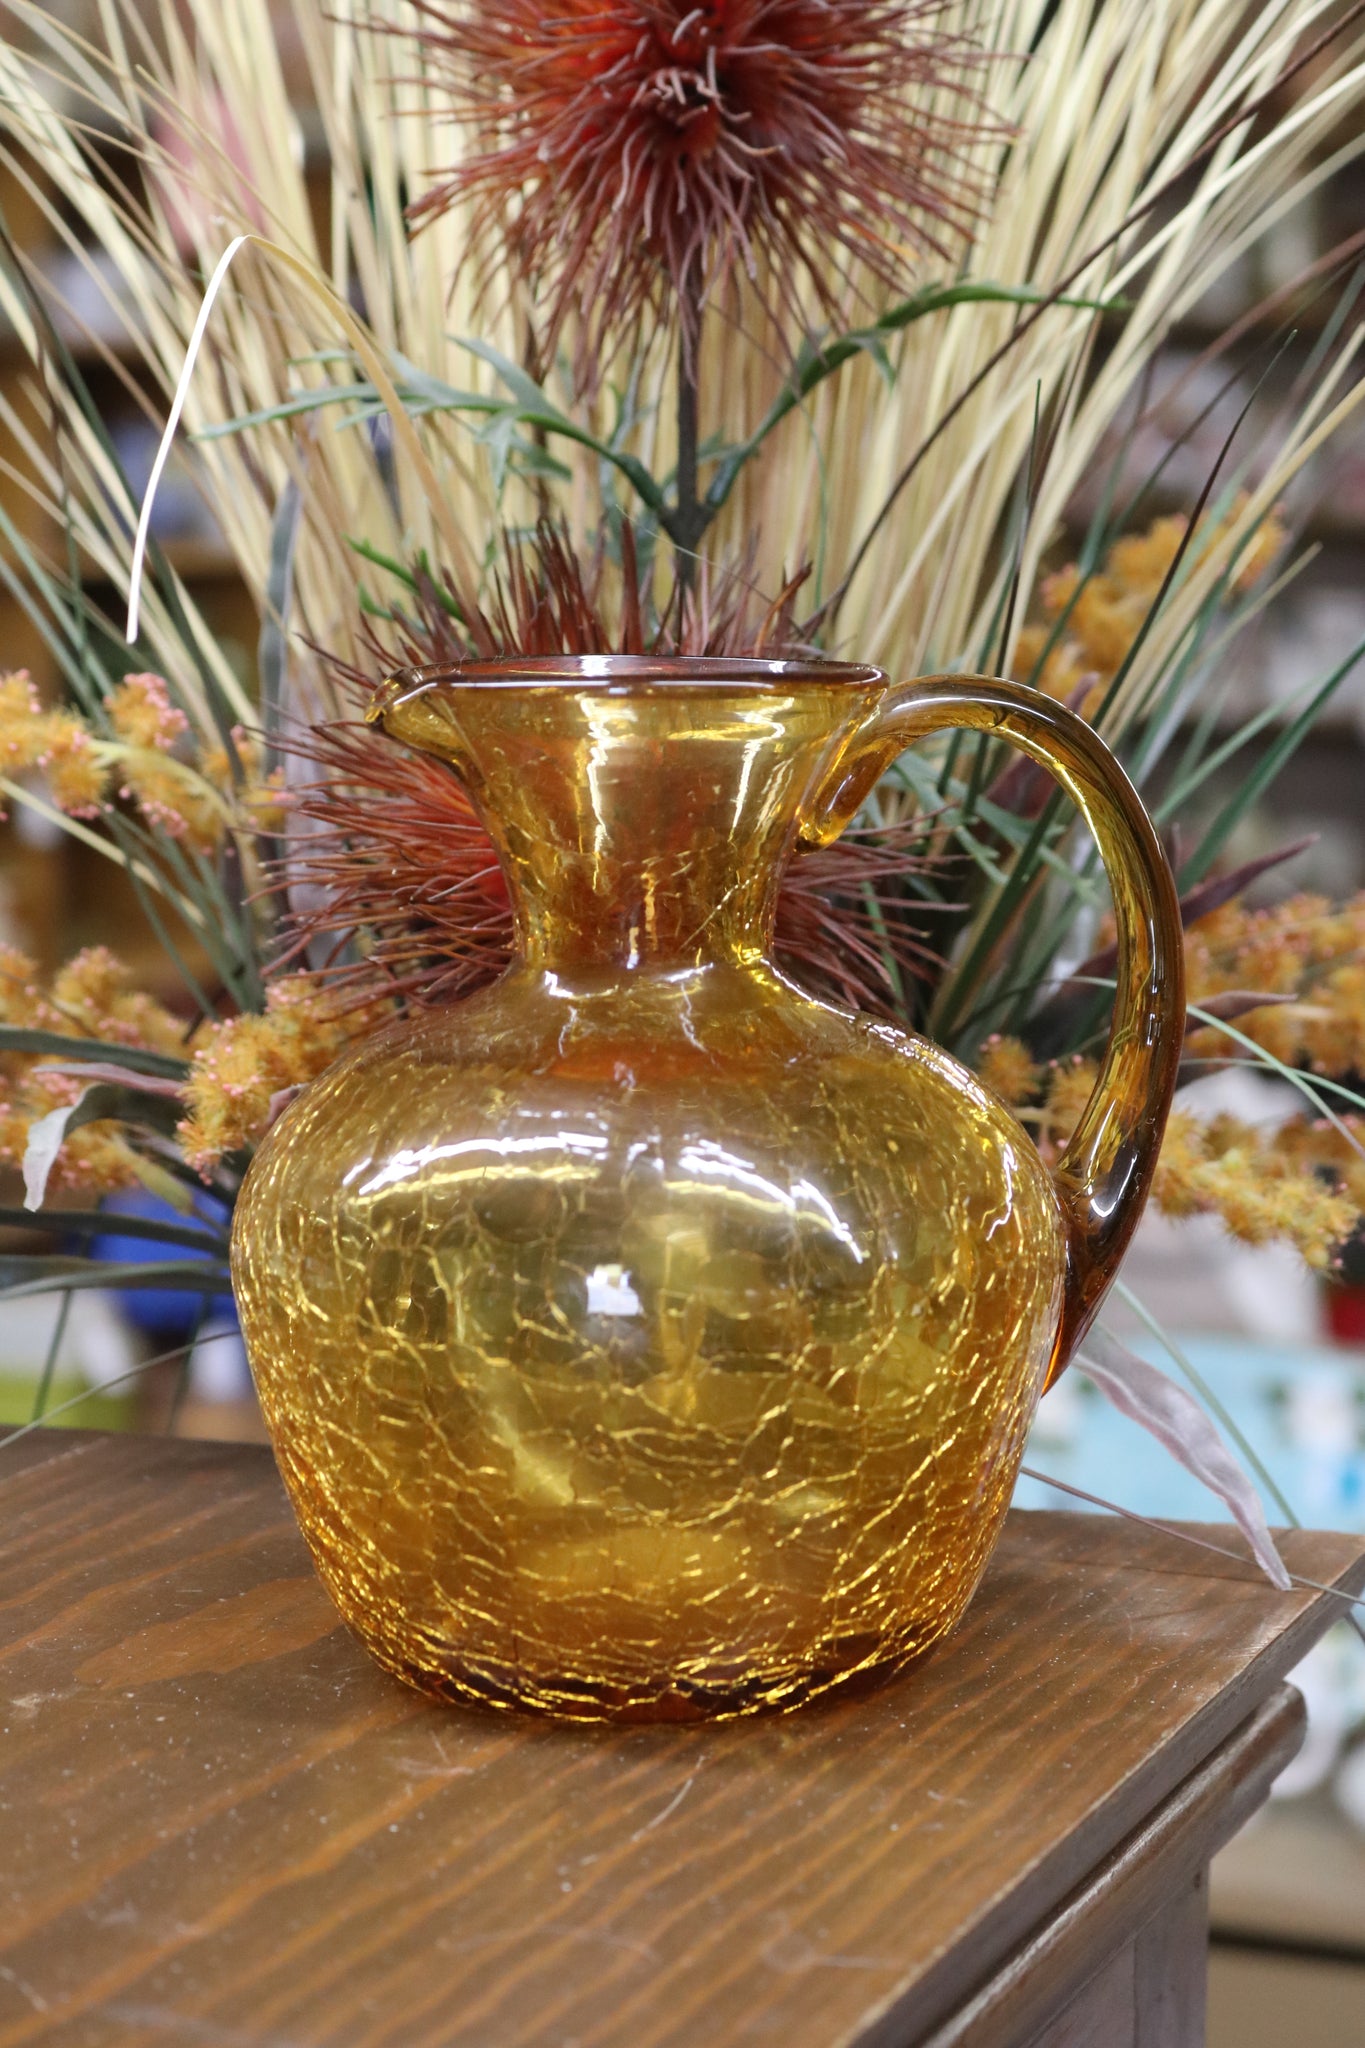 A Small Clear Crackled Amber Hand Blown Glass Pitcher With a